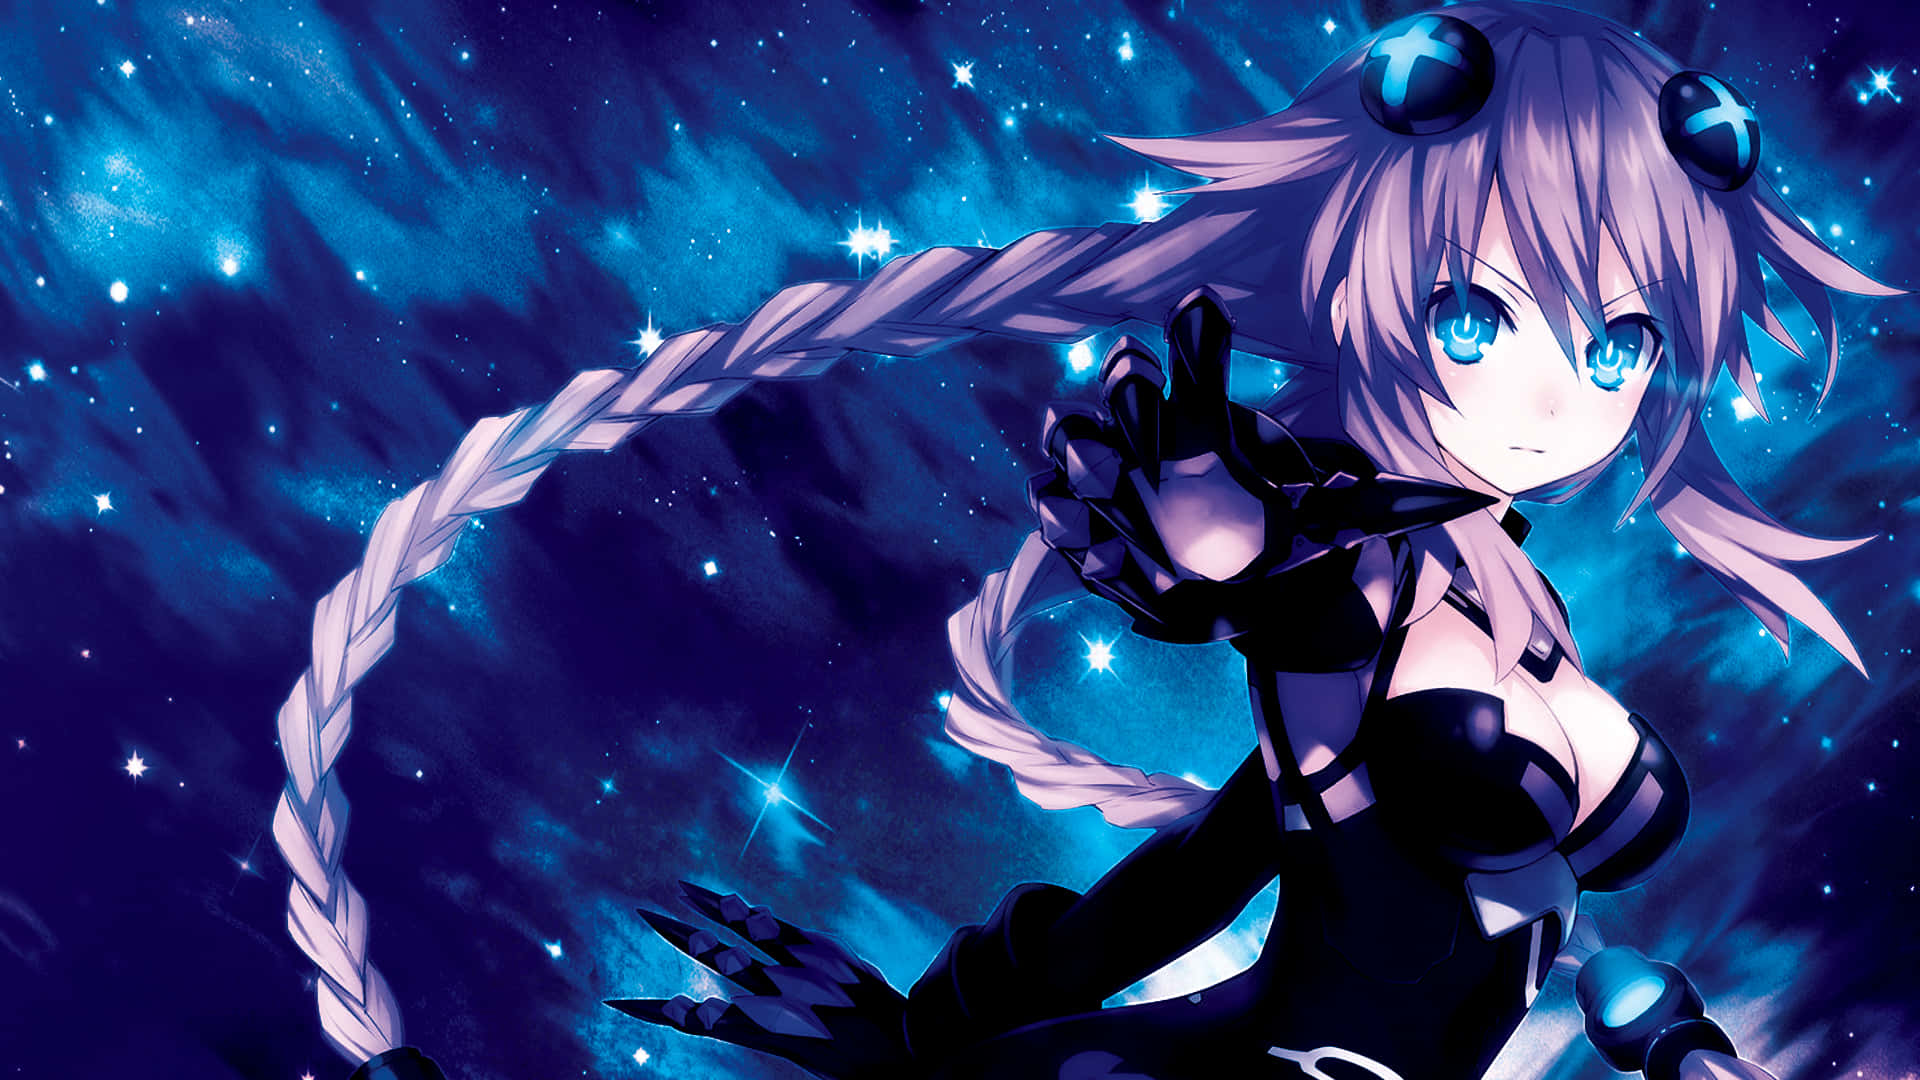 Anime Girl In Black And Blue With Blue Eyes Wallpaper